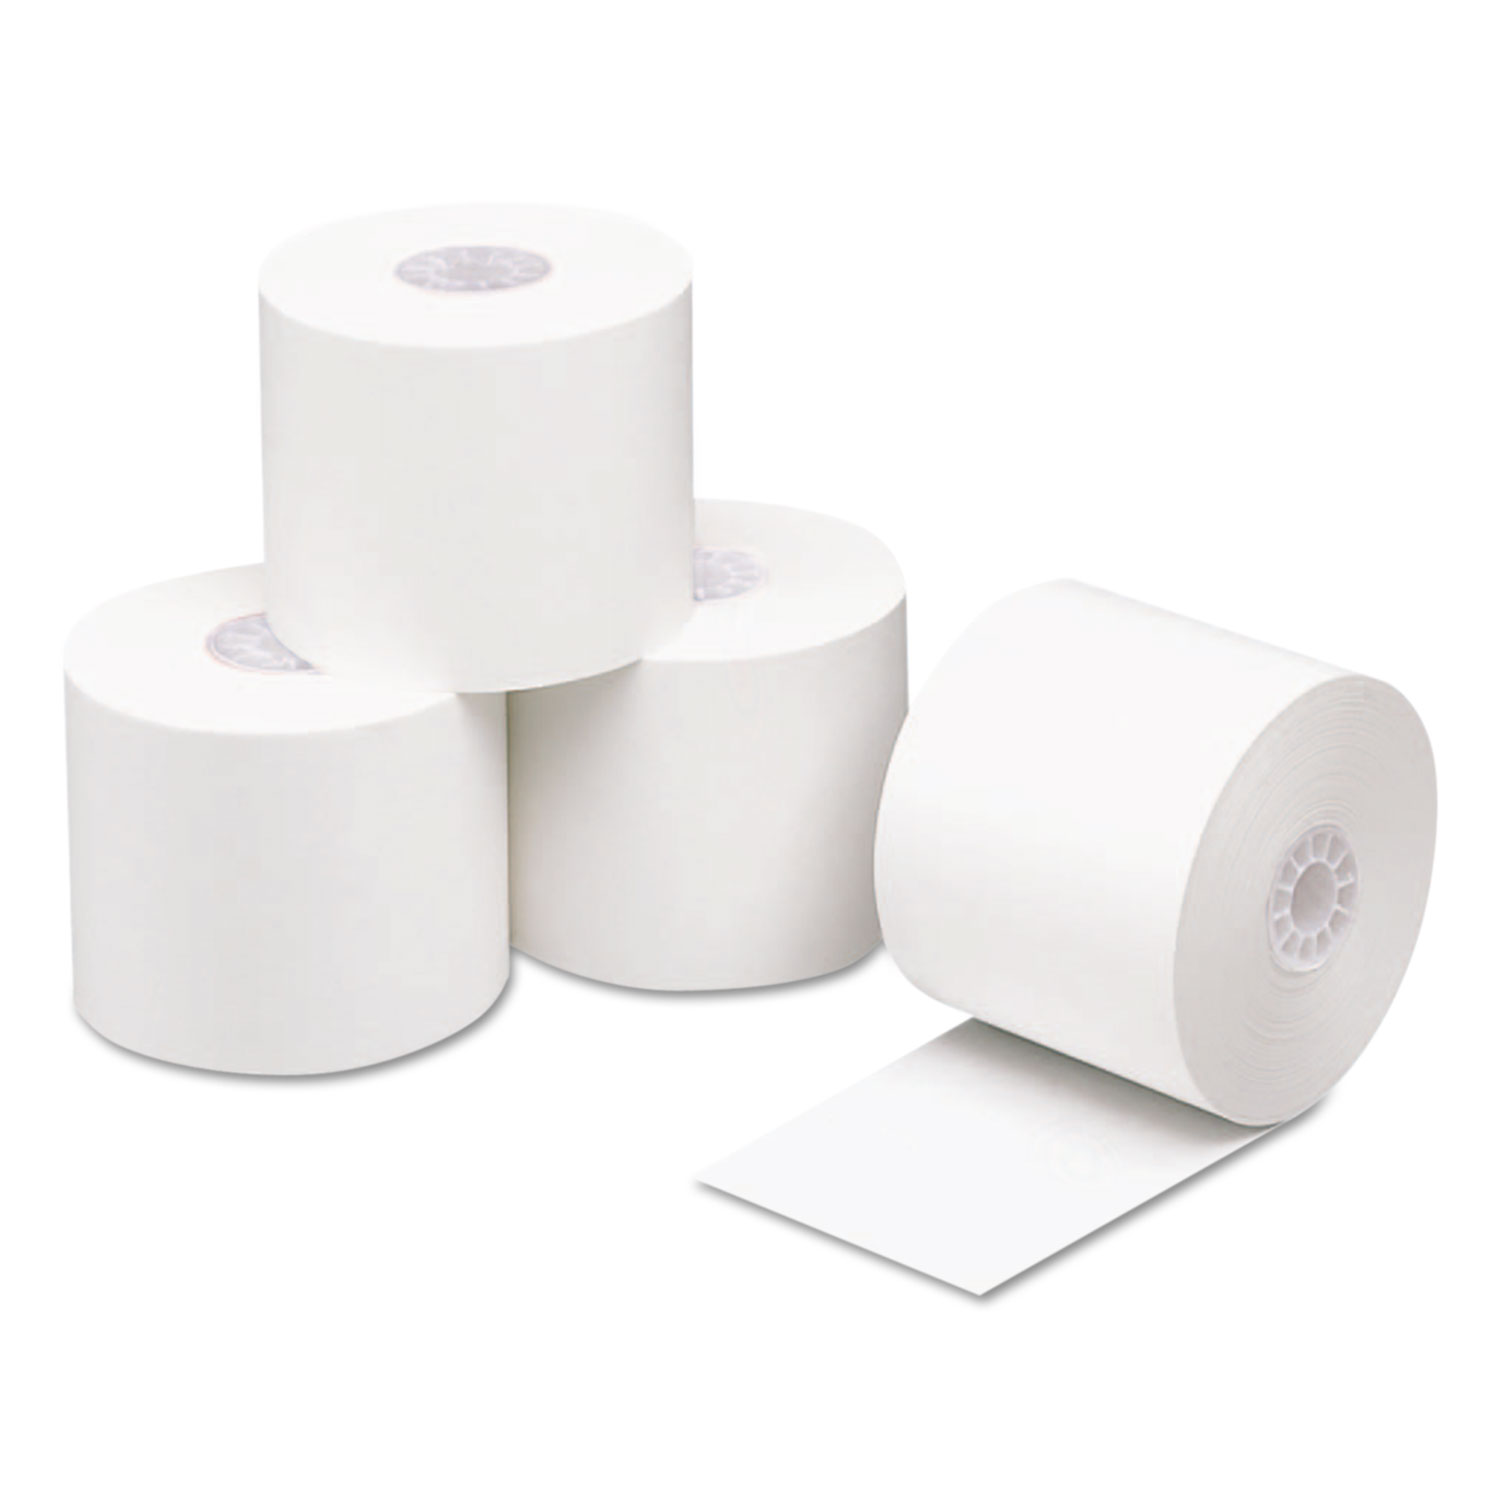  Iconex 05323 Direct Thermal Printing Paper, 2.3mil, 0.45 Core, 2.25 x 200 ft, White, 50/Carton (ICX90781285) 